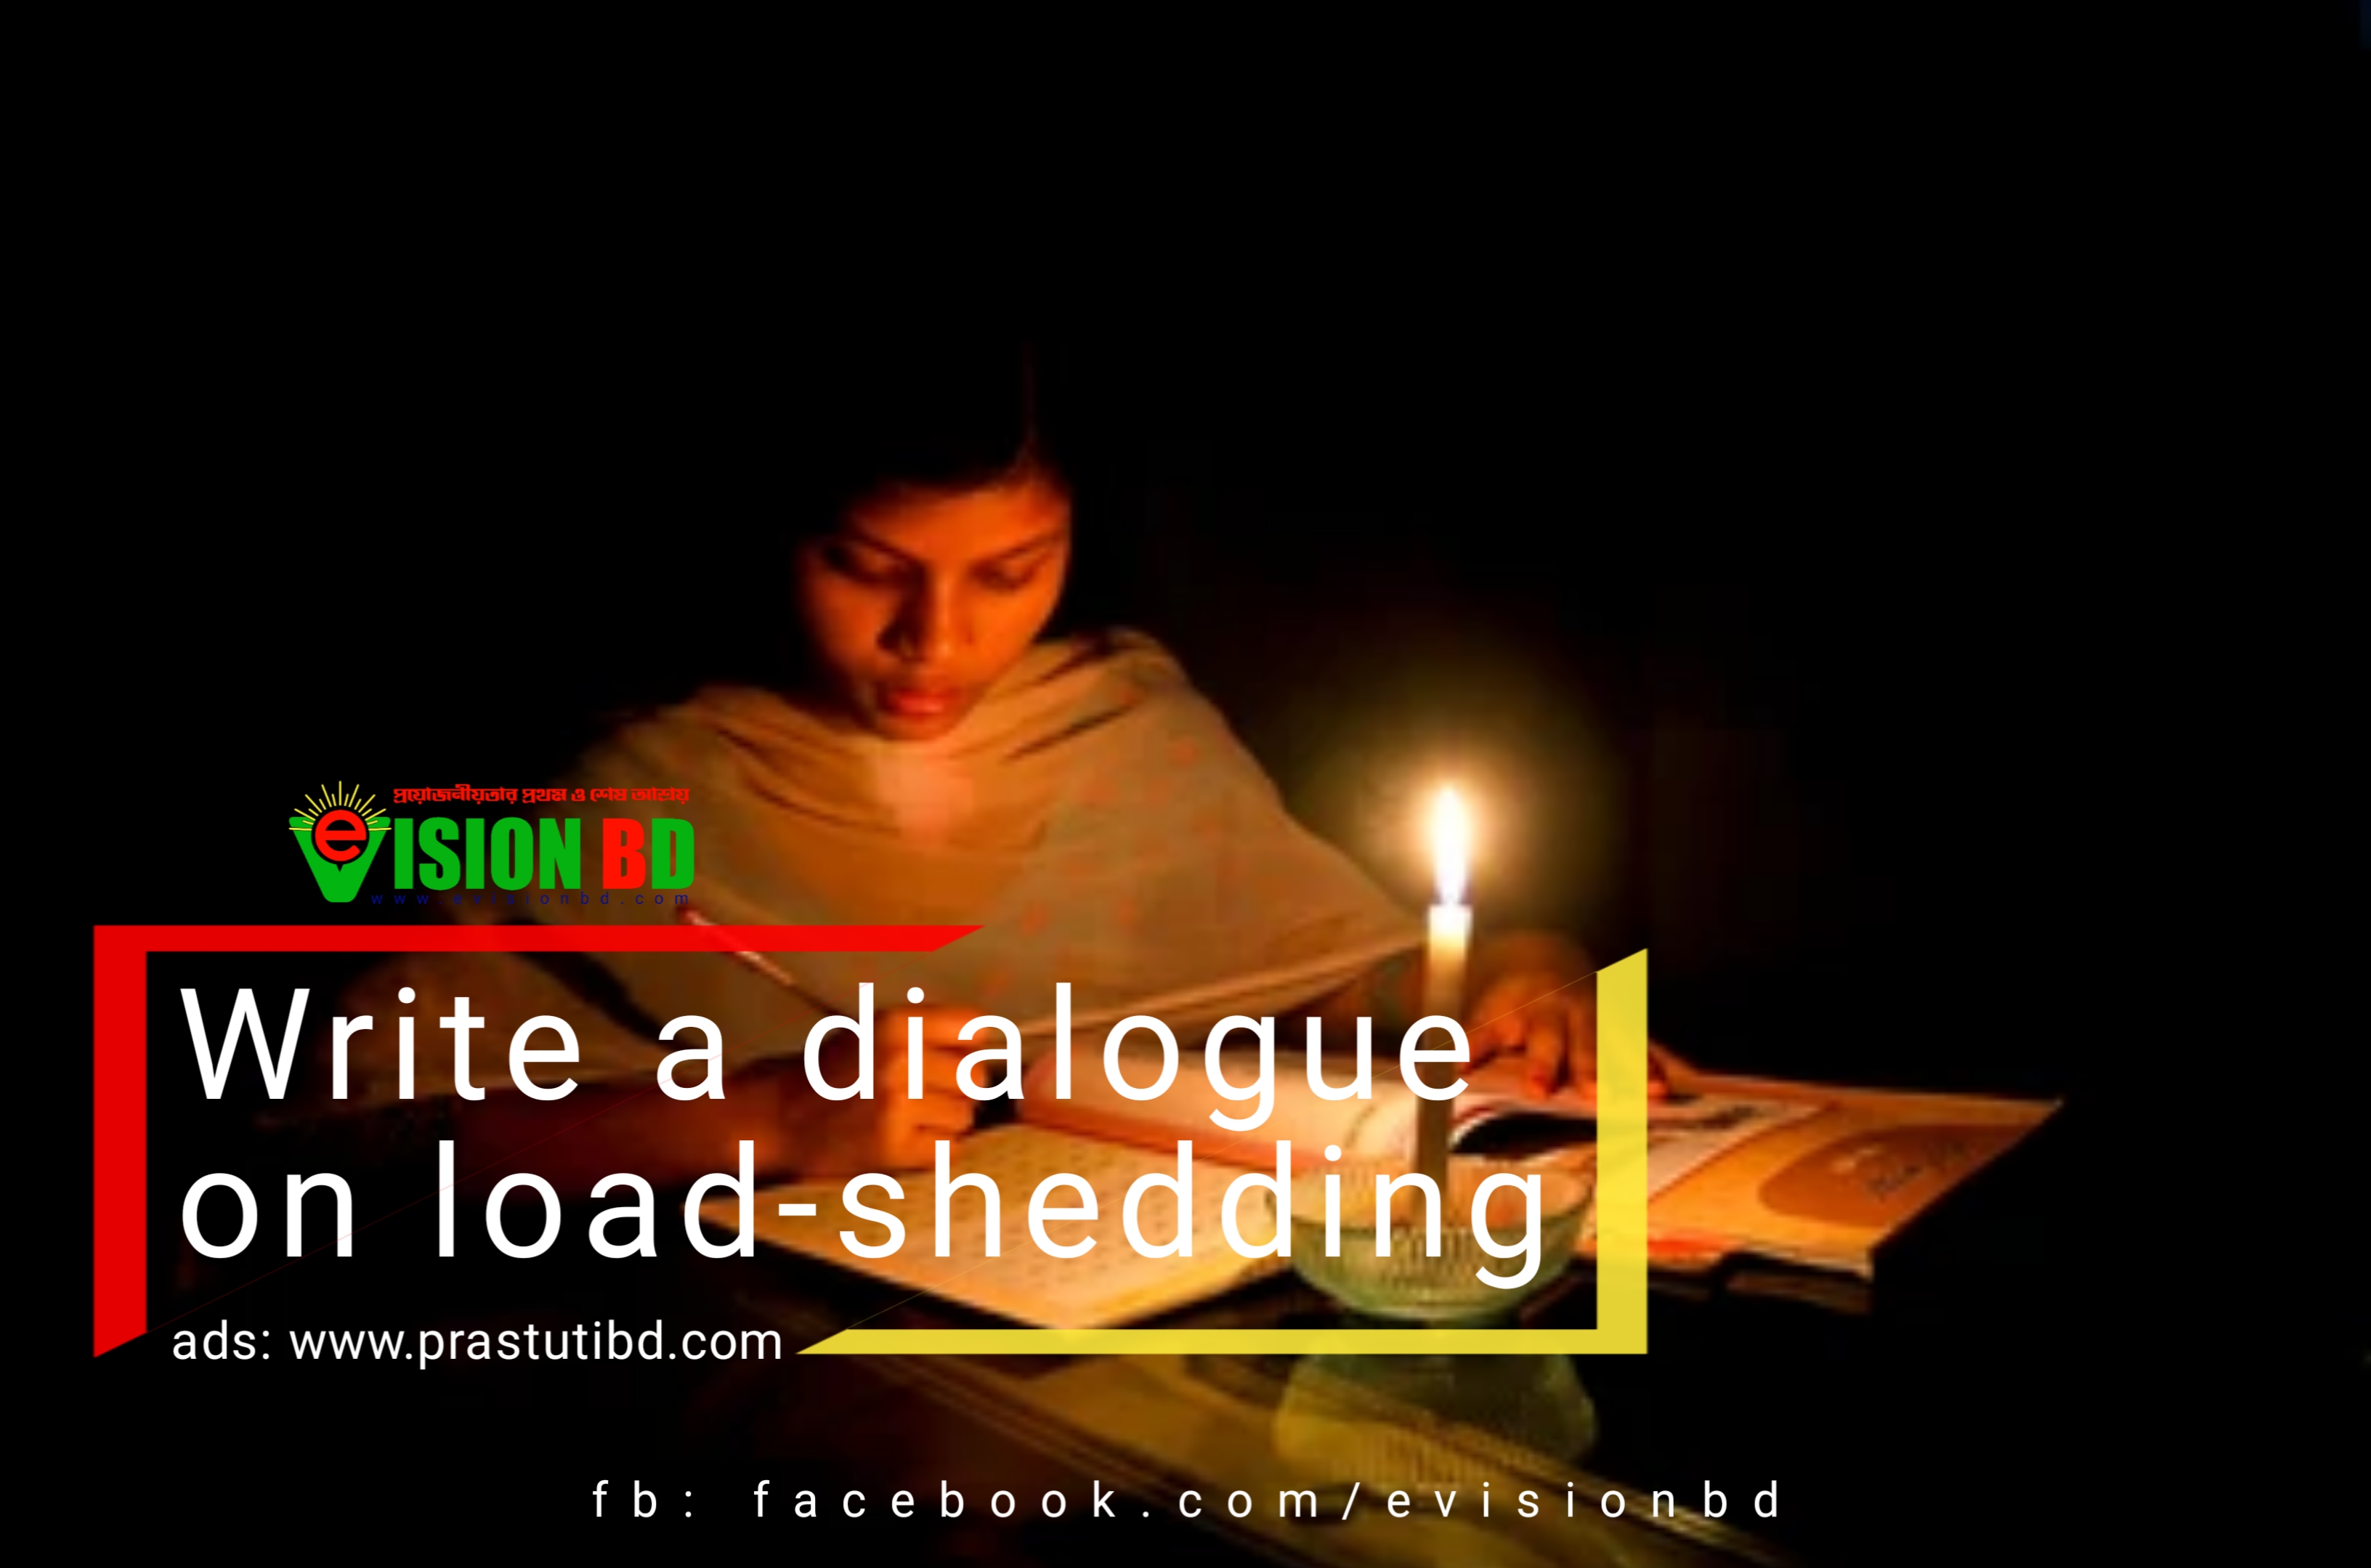 Write a dialogue between two friends about how load-shedding is interrupting everyday study.